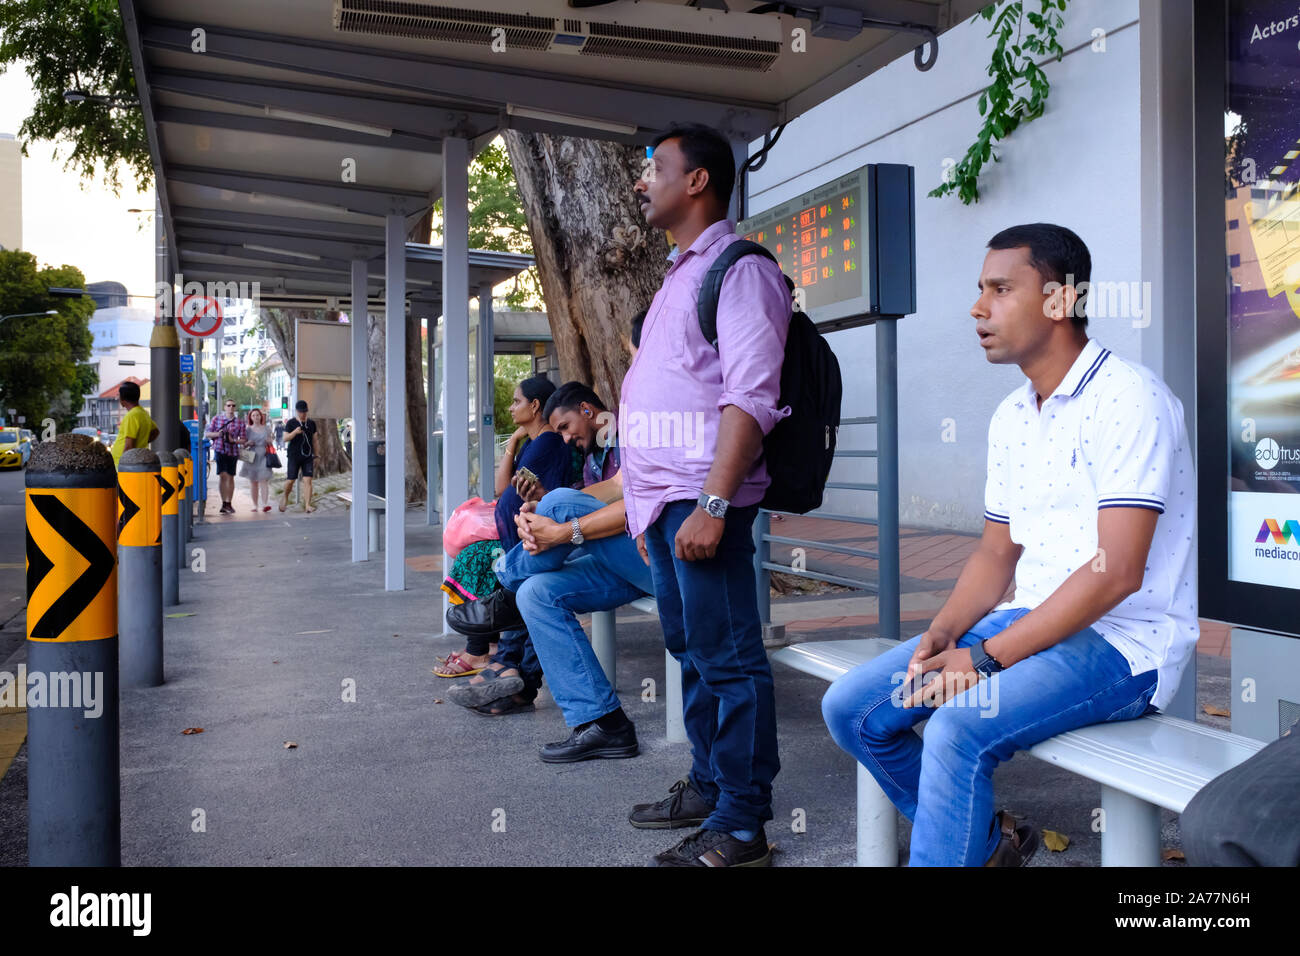 Singapore-17 MAR 2018: Indians waiting for the bus in bus stop Stock Photo